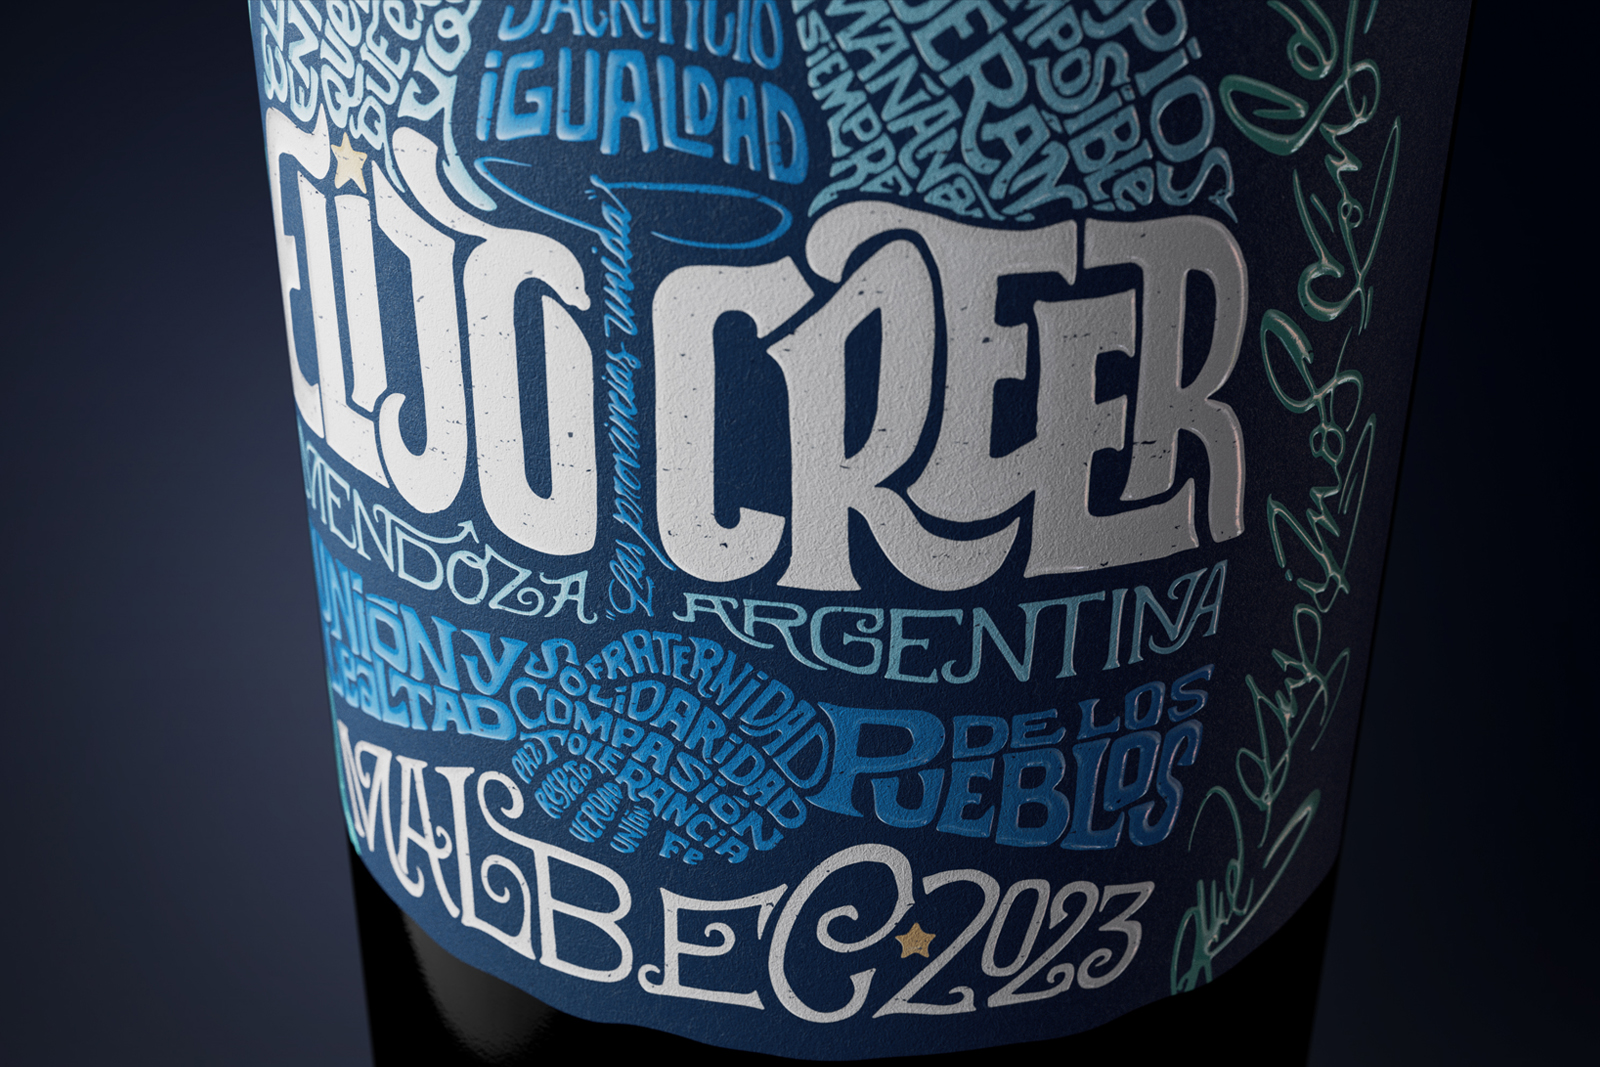 Elijo Creer: An Uplifting Wine Label Design Inspired on the Qatar 2022 World Cup